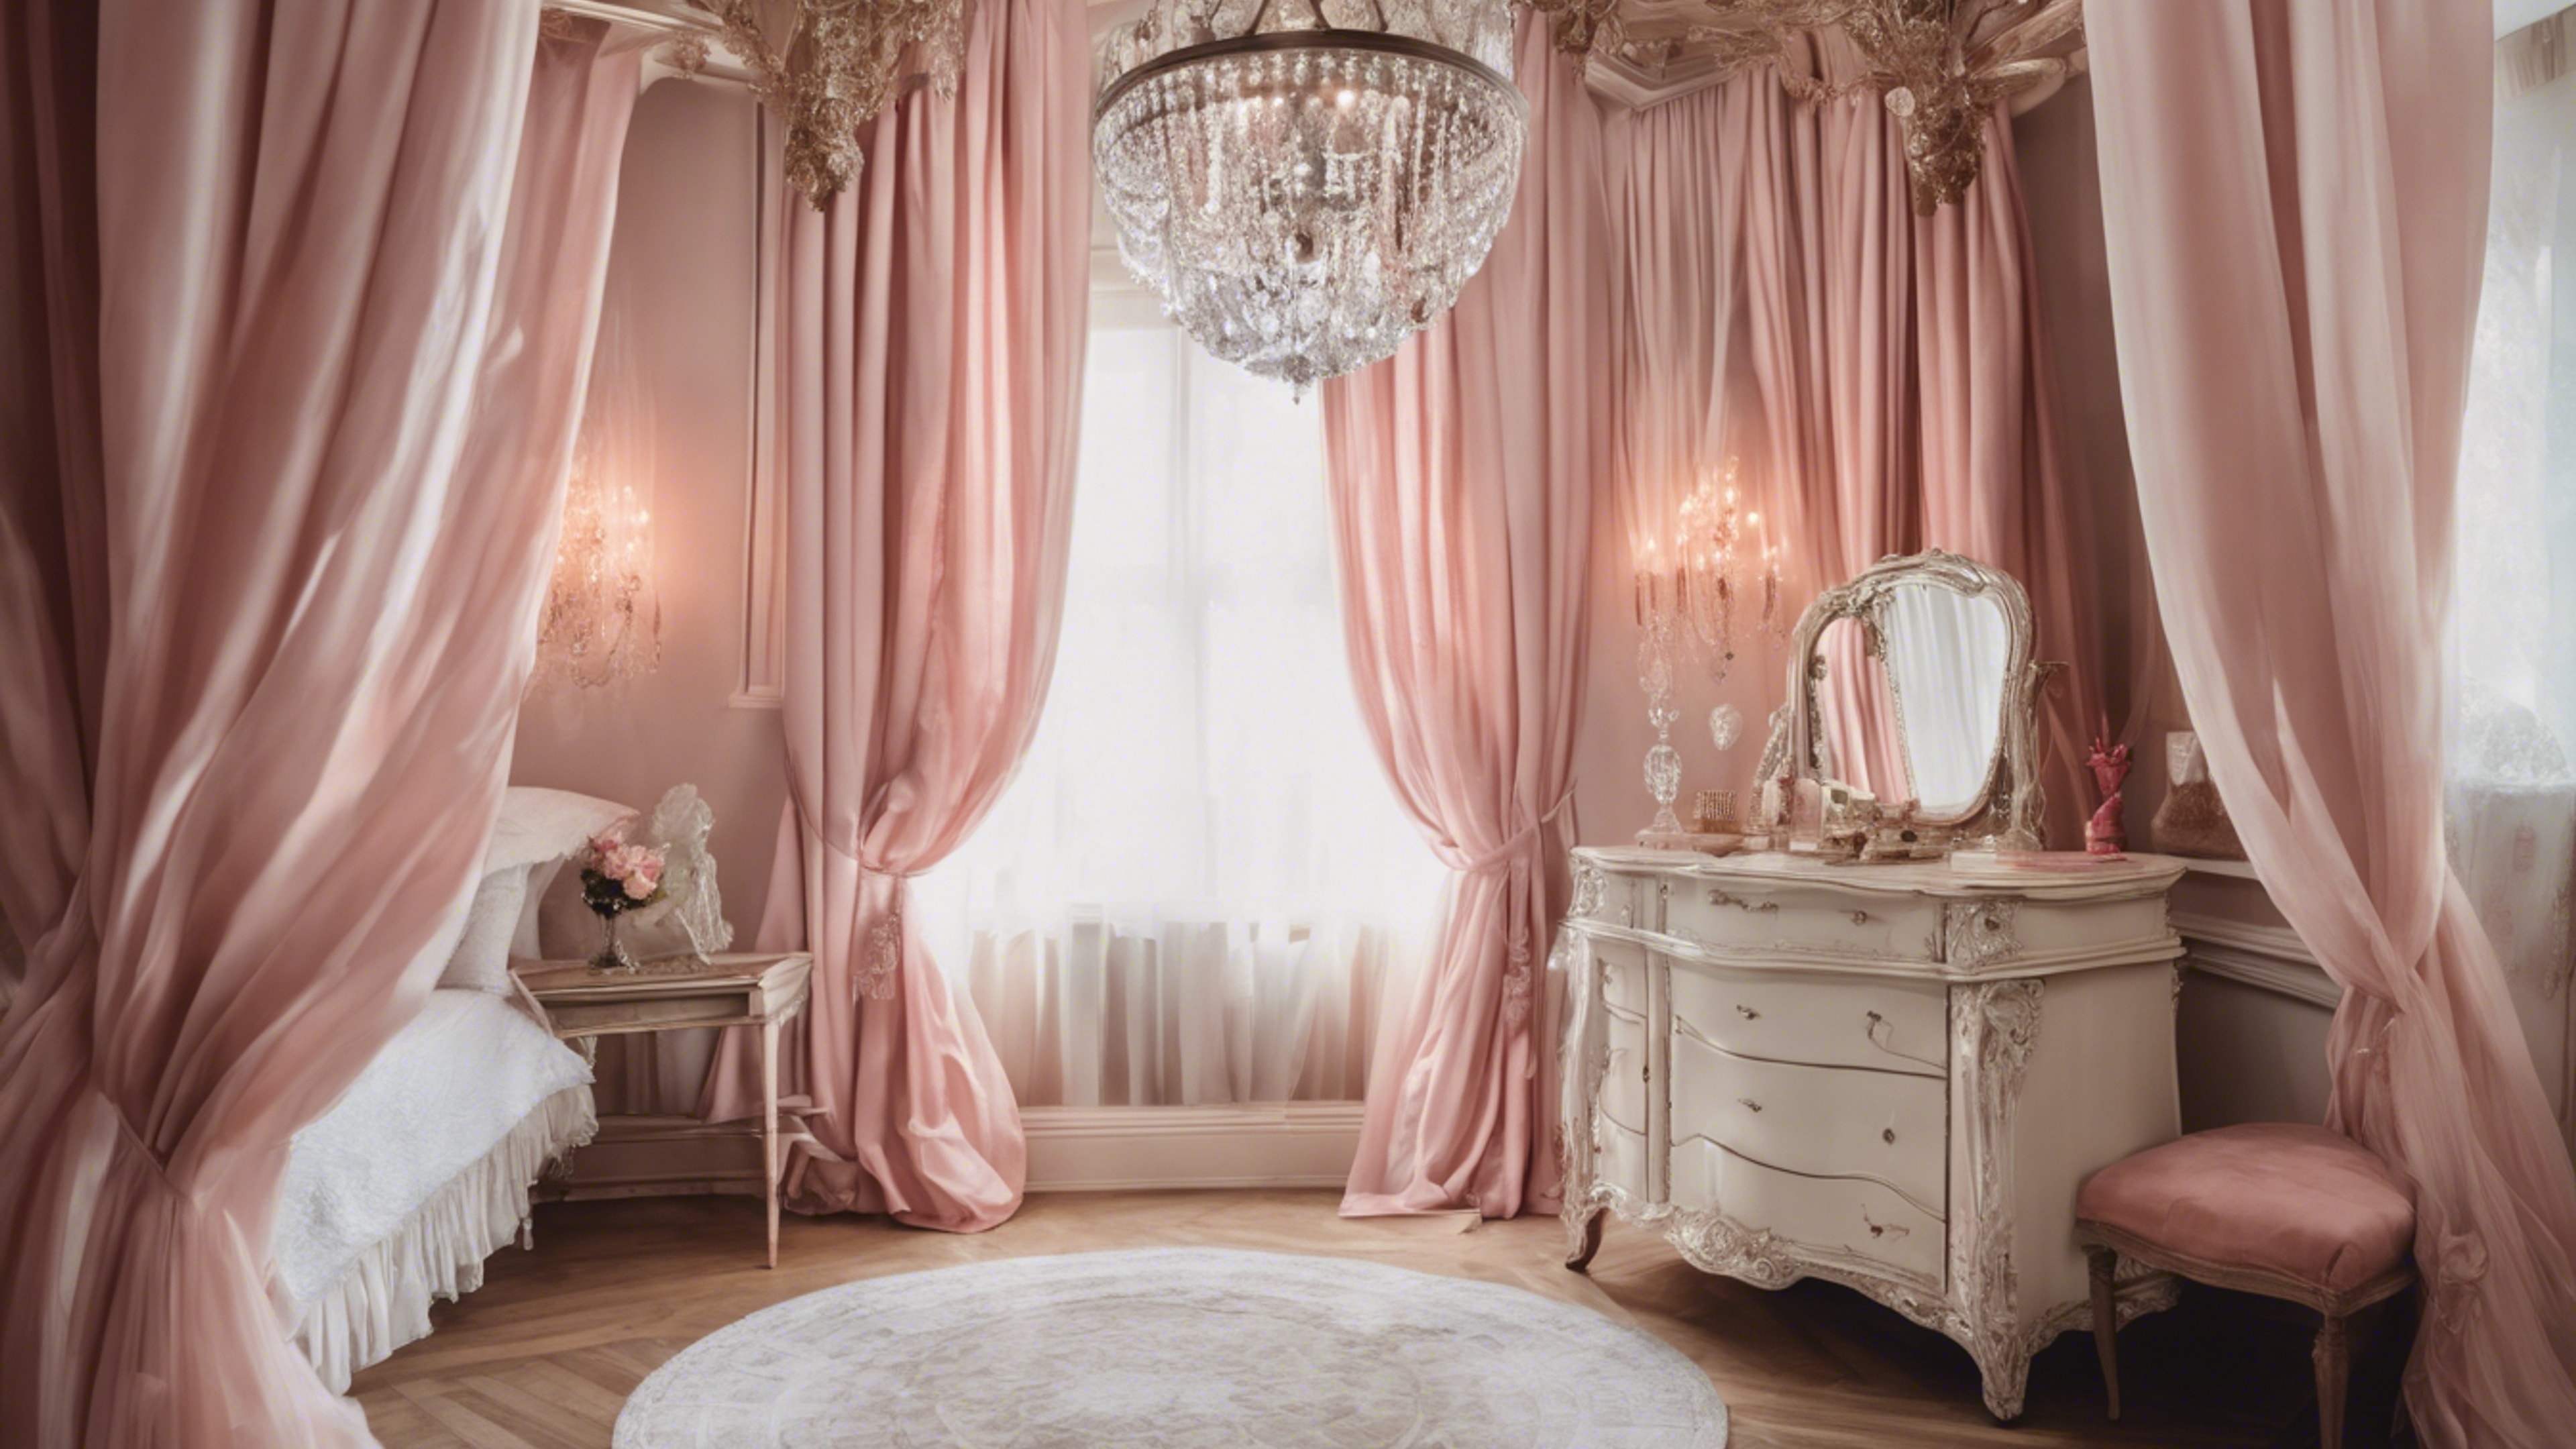 A feminine French bedroom, with canopy bed draped in soft-pink curtains, crystal chandelier hanging overhead, and an elegant antique vanity. ផ្ទាំង​រូបភាព[9a96ceac1df24dd59ae9]